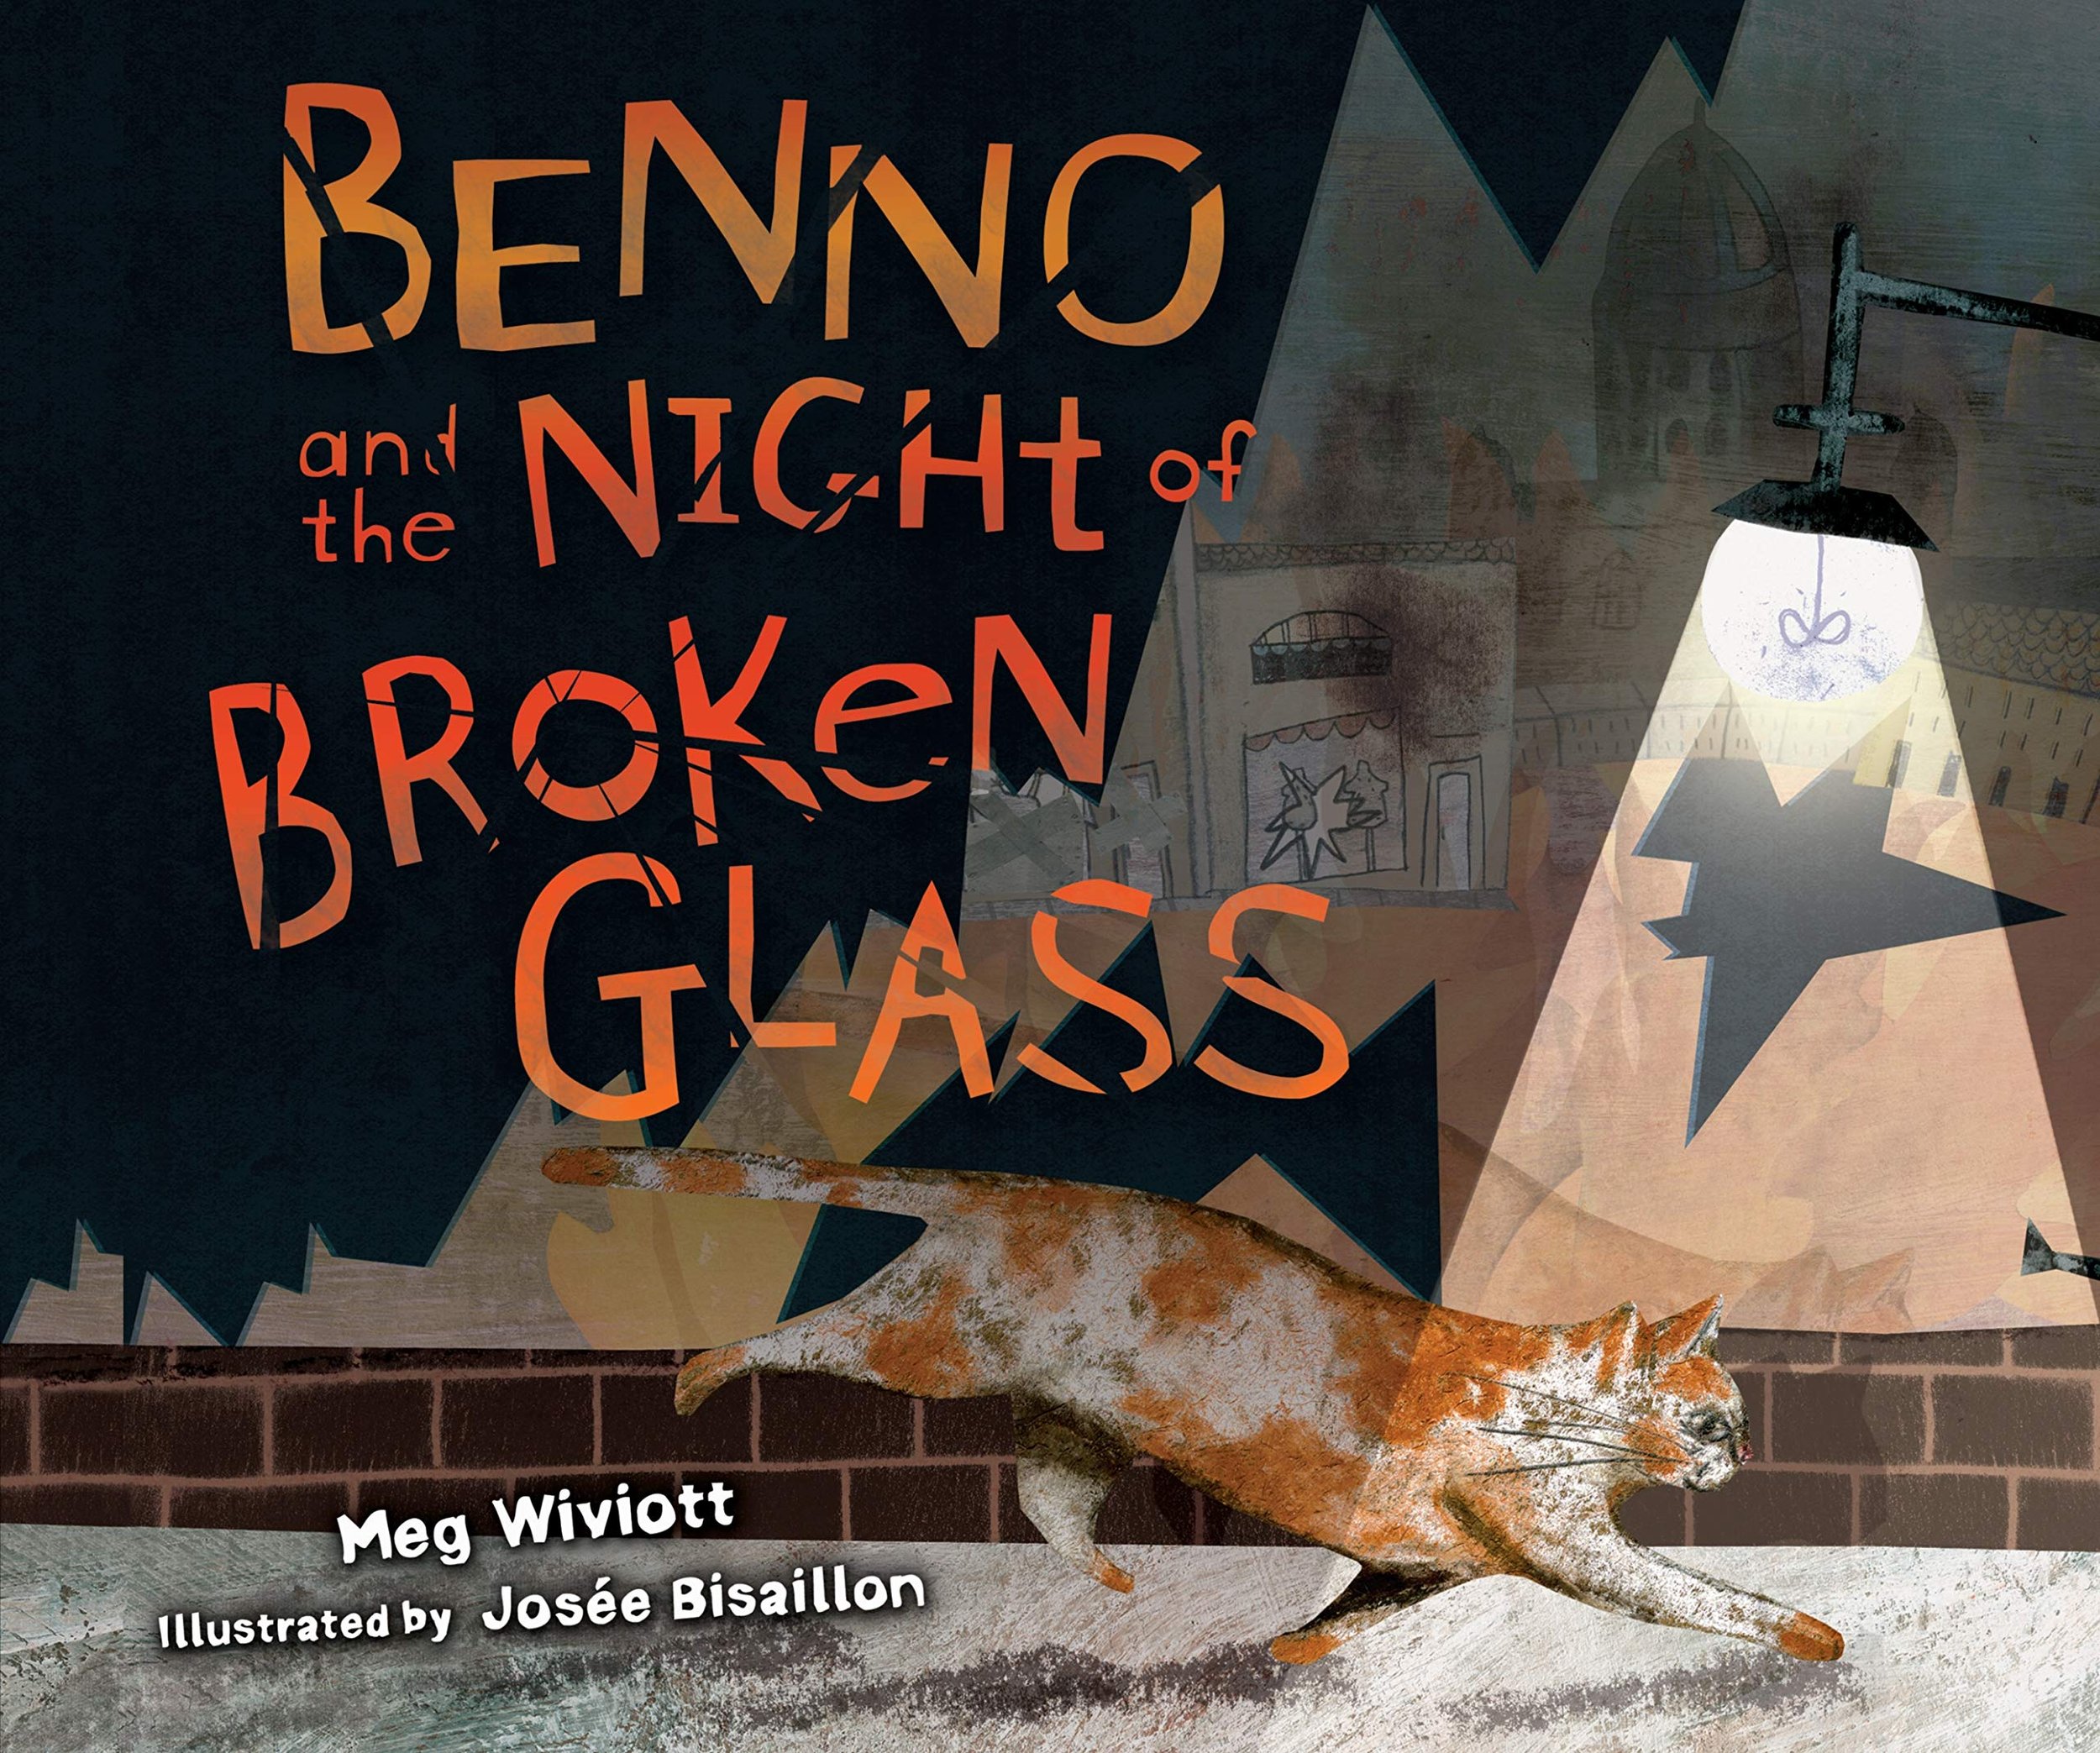 Benno and the Night of the Broken Glass